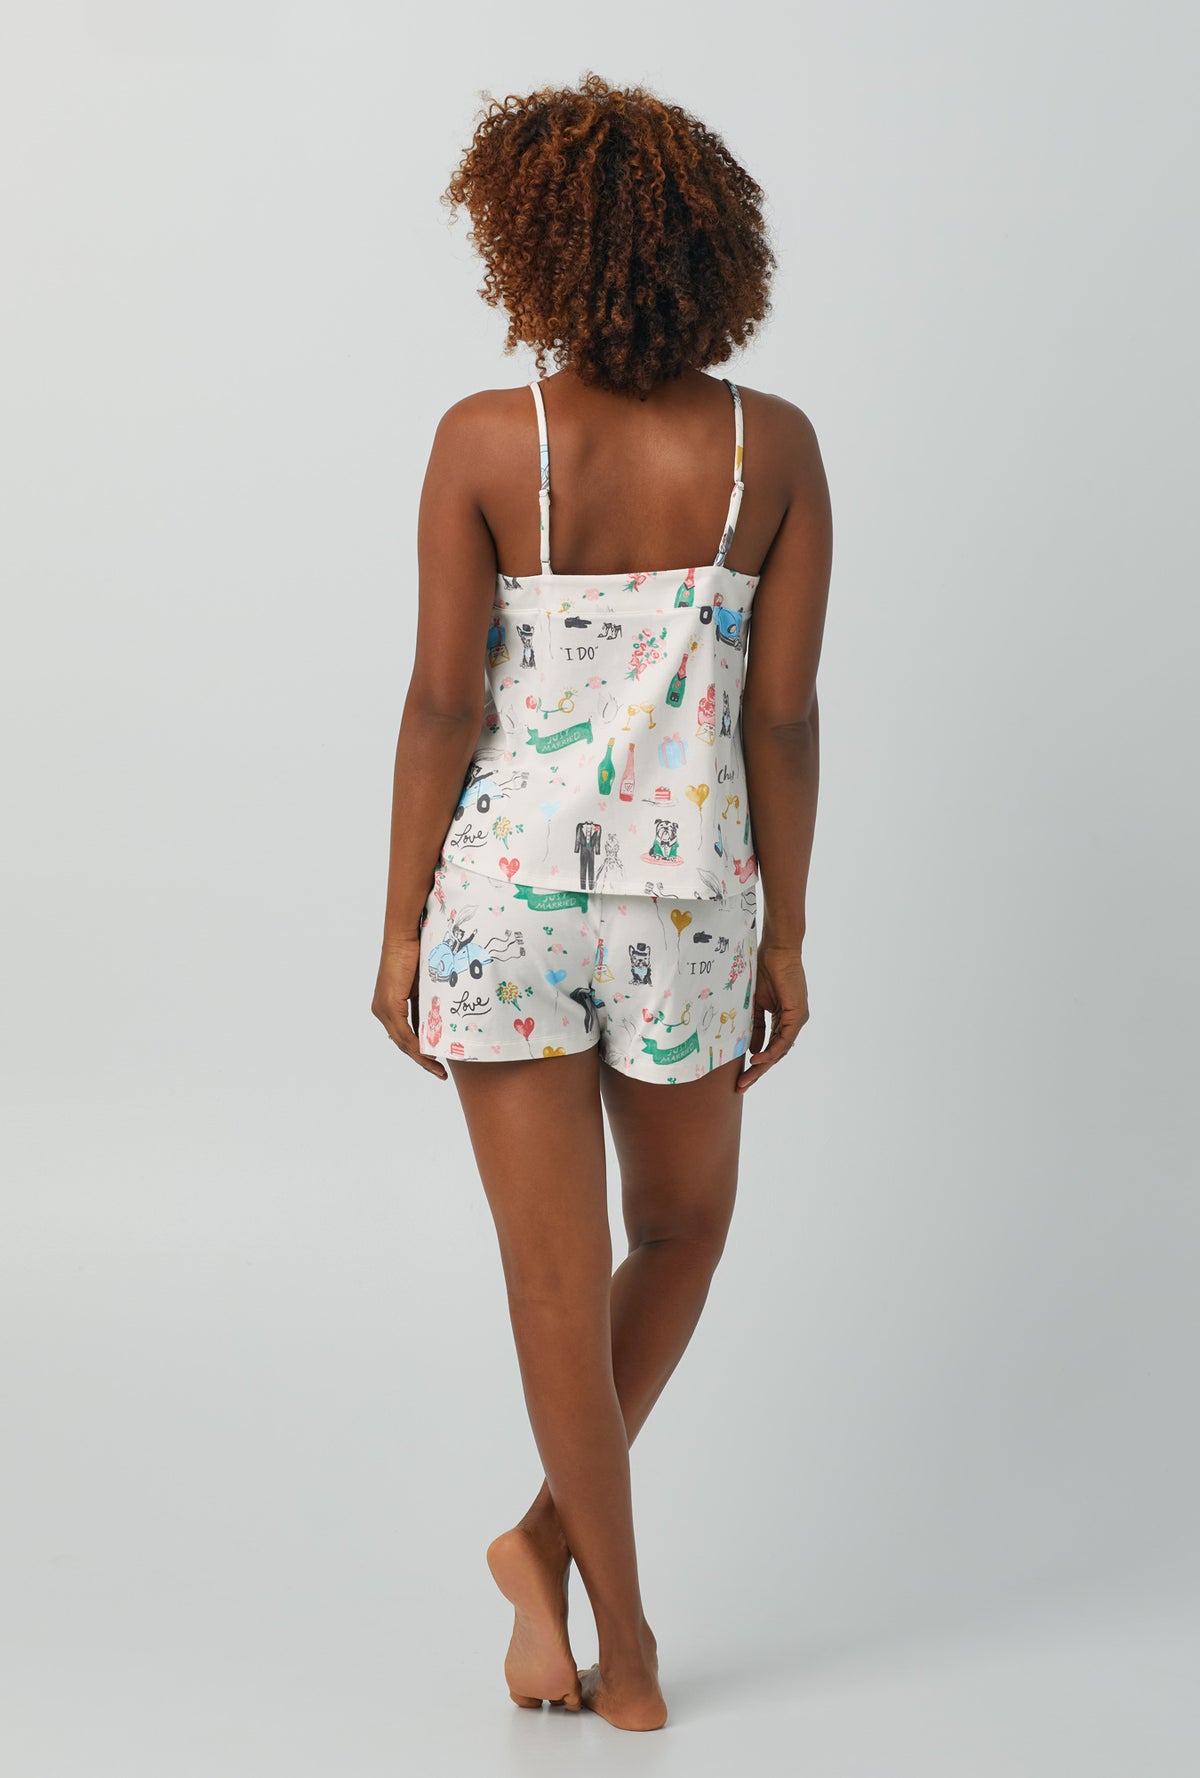 A lady wearing Cami Stretch Jersey Shorty PJ Set with just married print